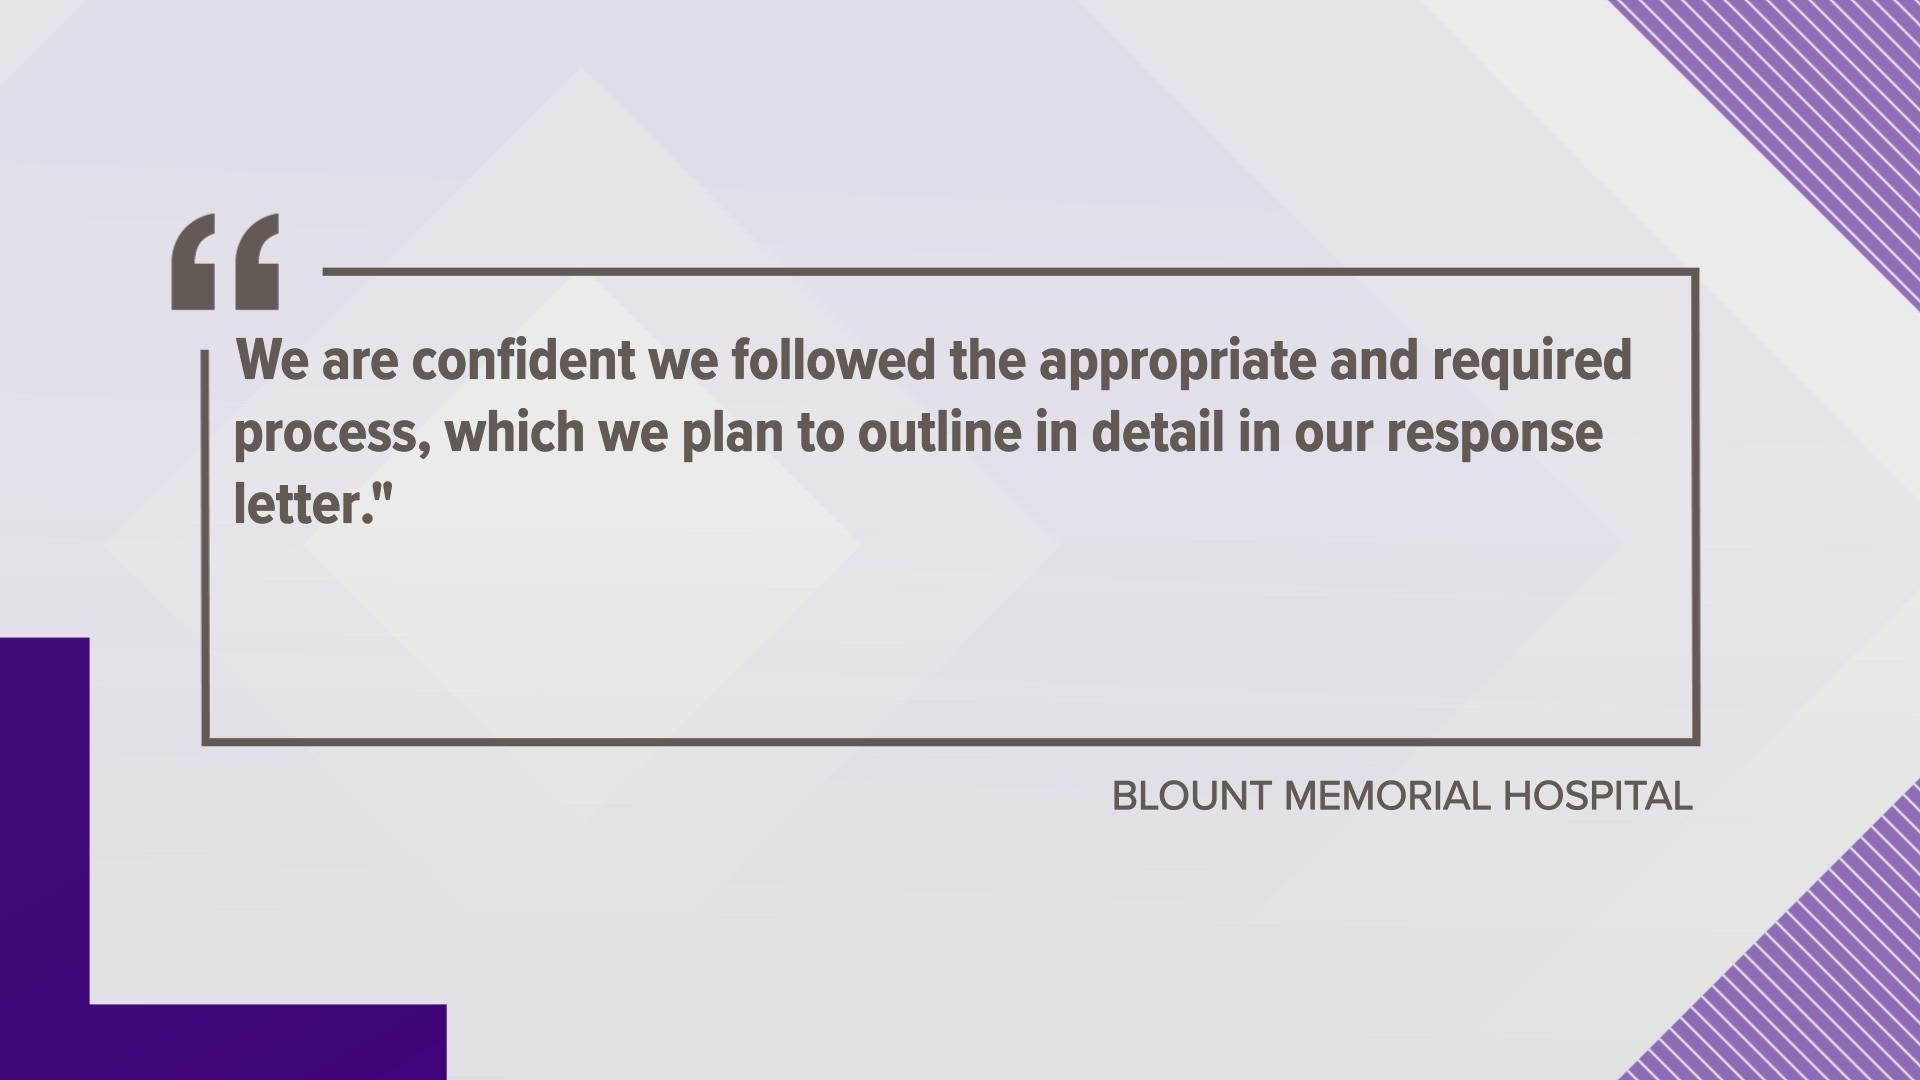 The mayors of Alcoa, Maryville and Blount County wrote a letter to Blount Memorial Hospital saying they heard several concerns from people about their CEO selection.